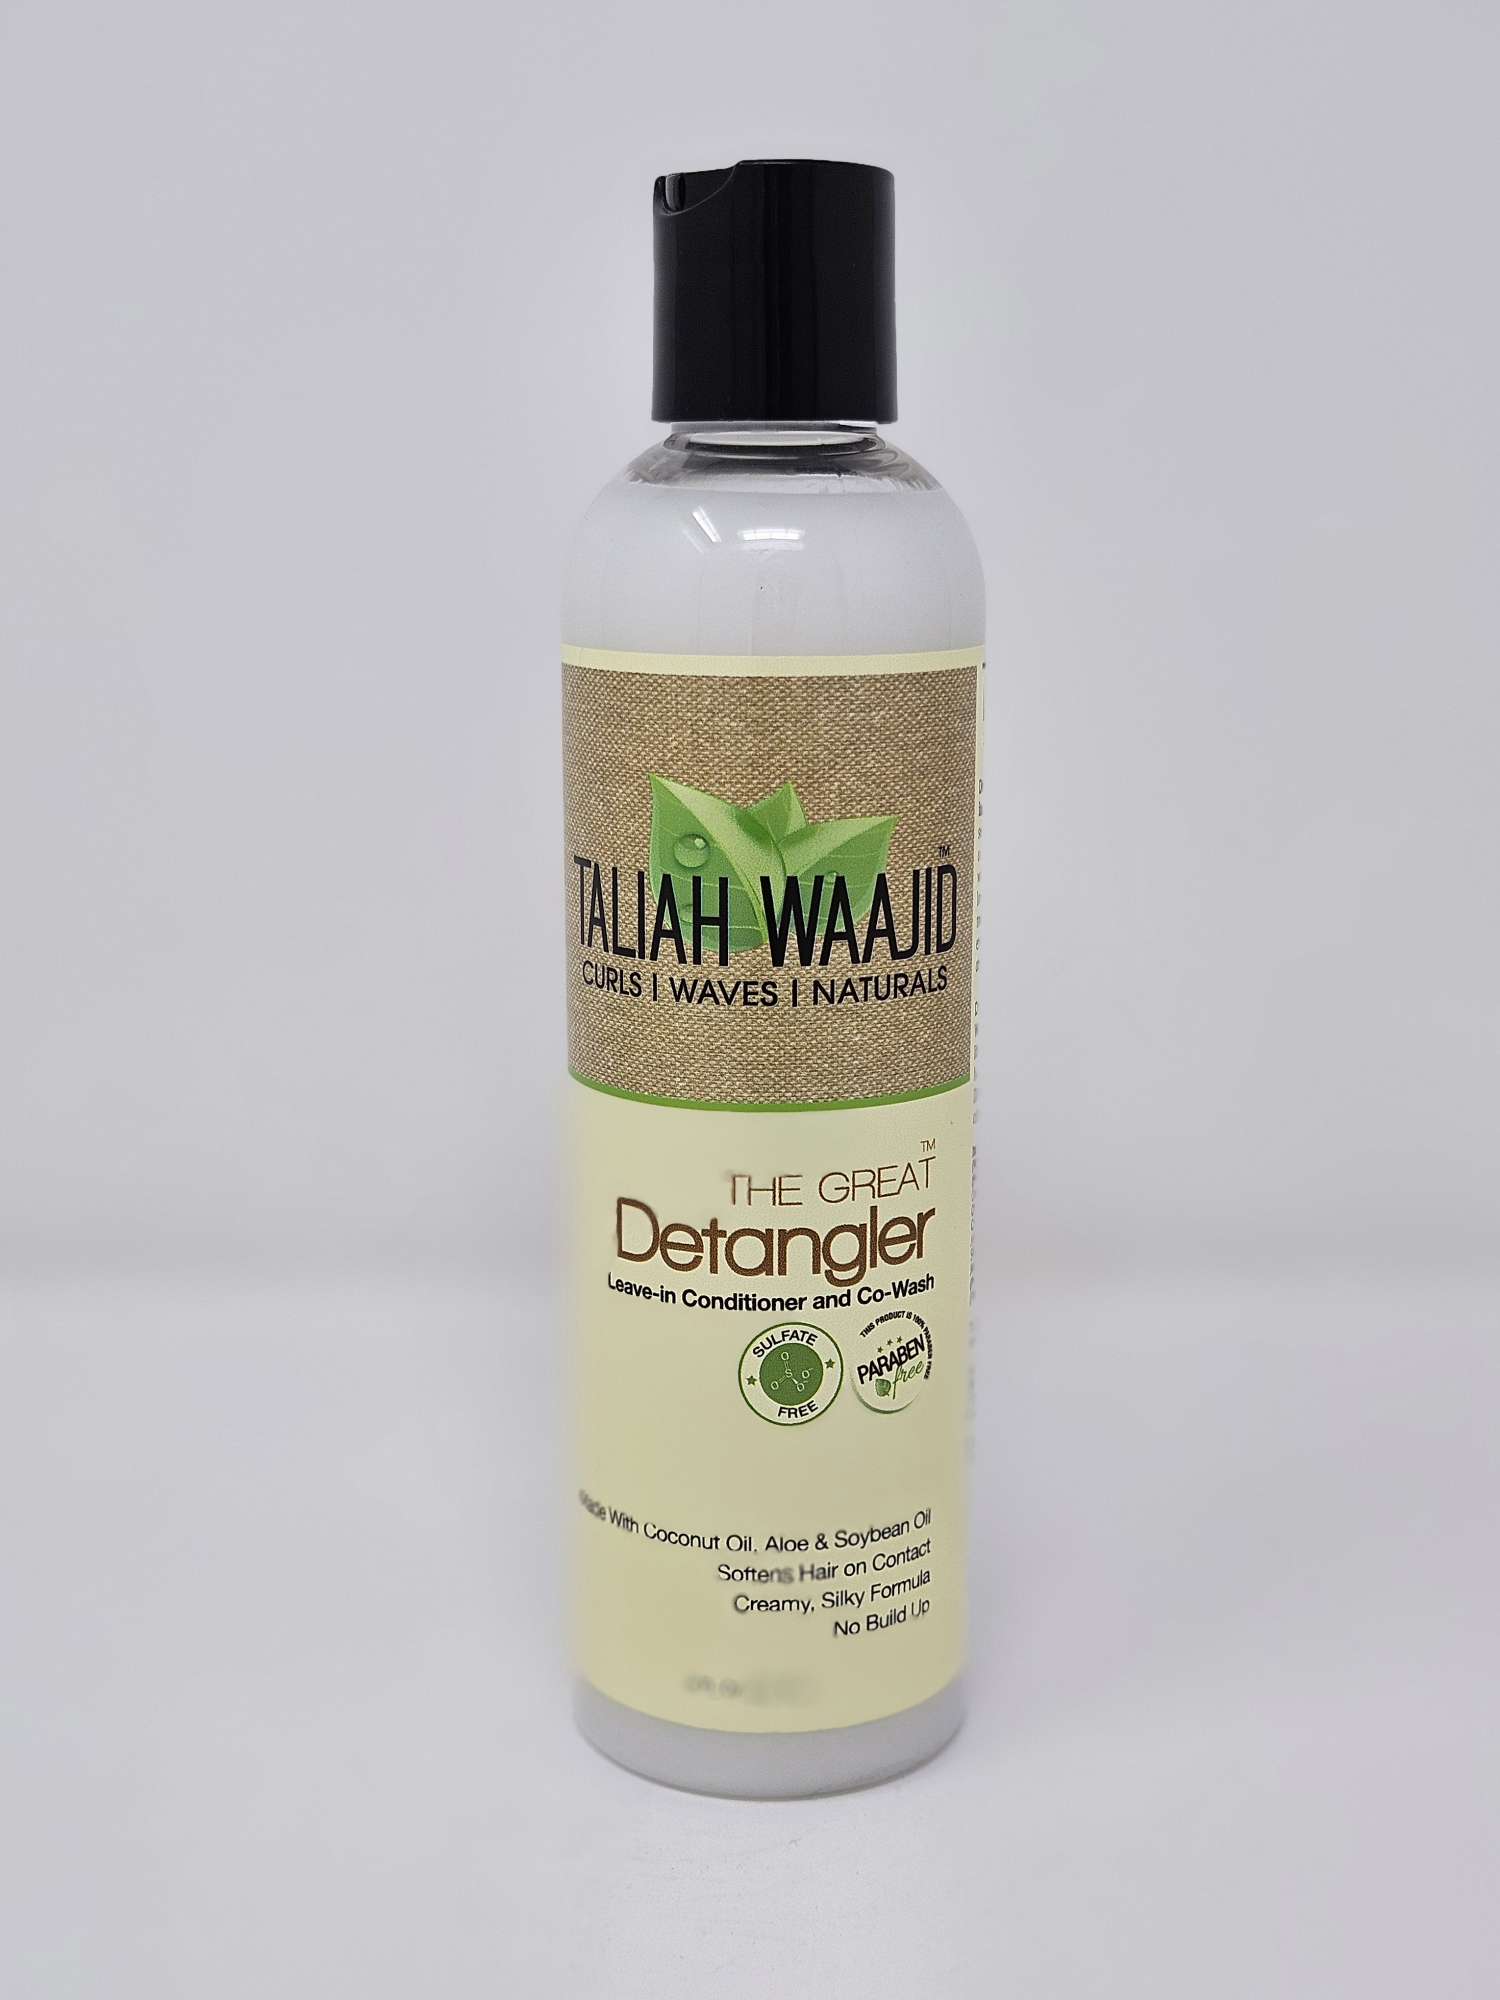 Taliah Waajid The Great Detangler Leave-In Conditioner and Co-Wash - 8oz